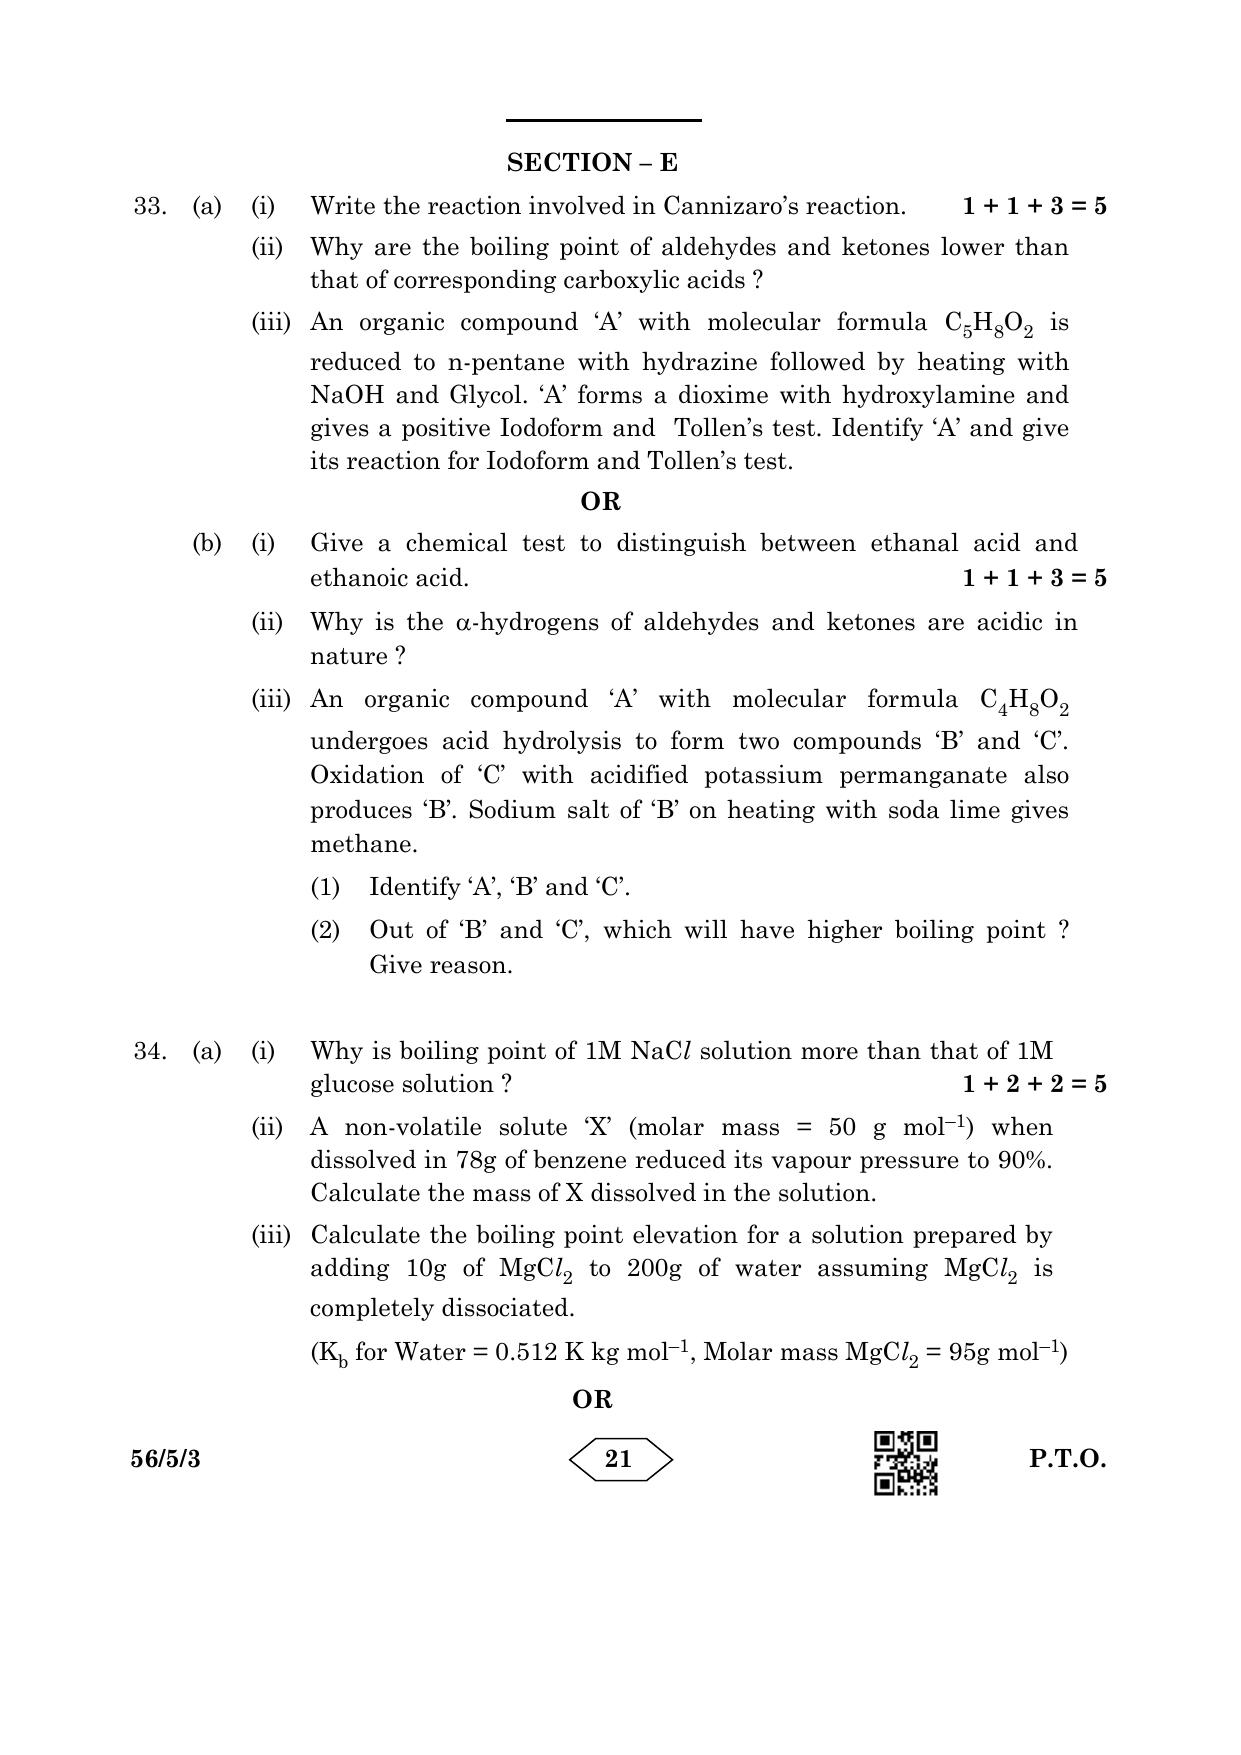 CBSE Class 12 56-5-3 Chemistry 2023 Question Paper - Page 21